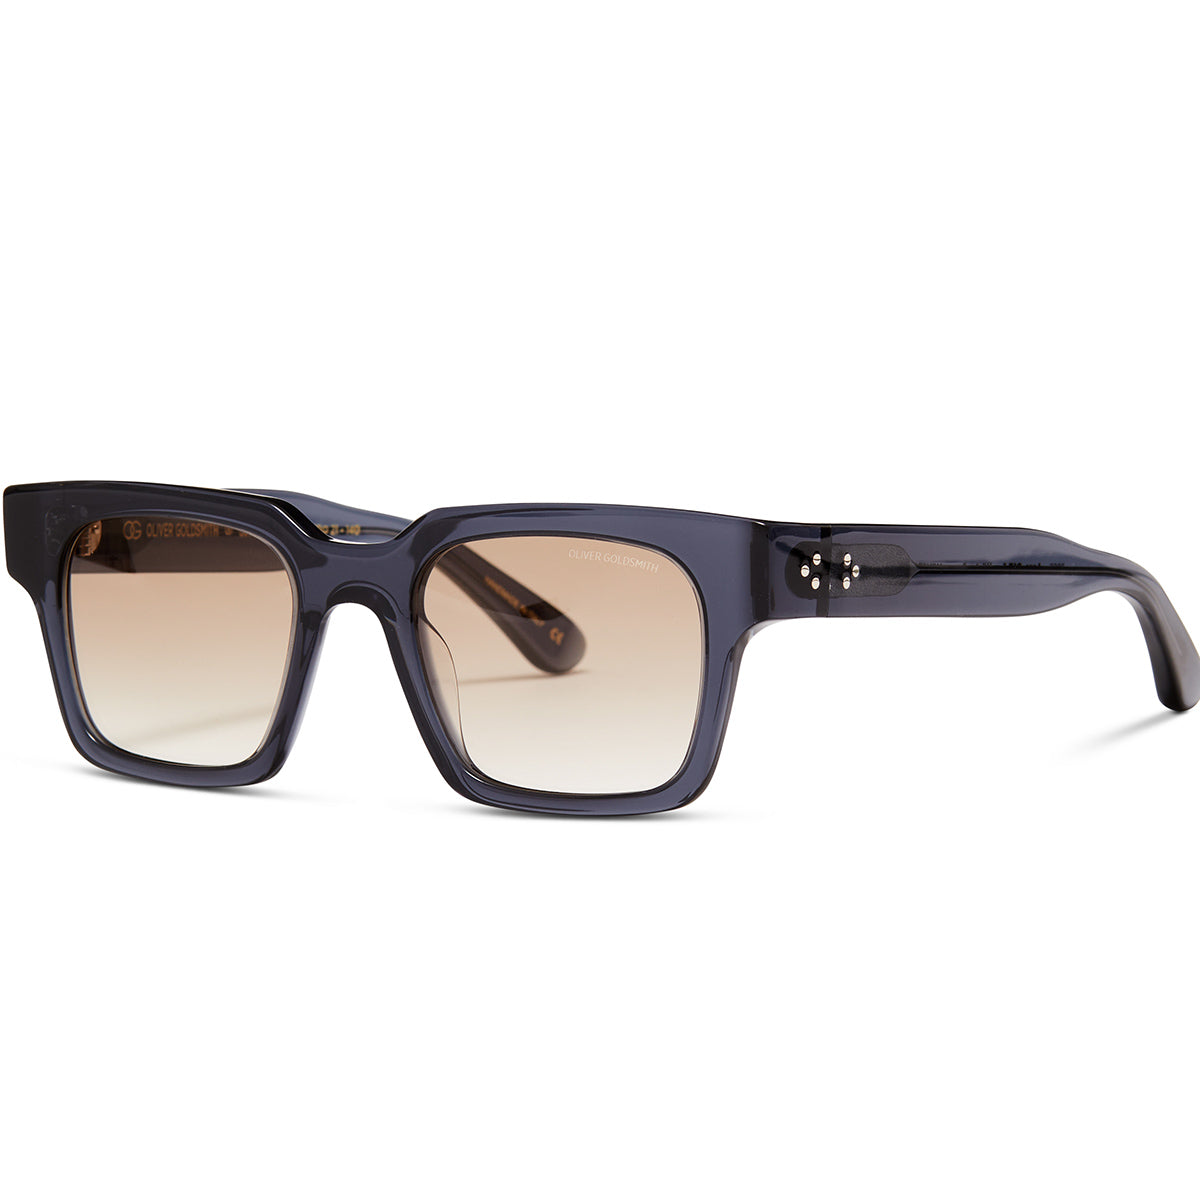 Winston WS Sunglasses with 10pm acetate frame